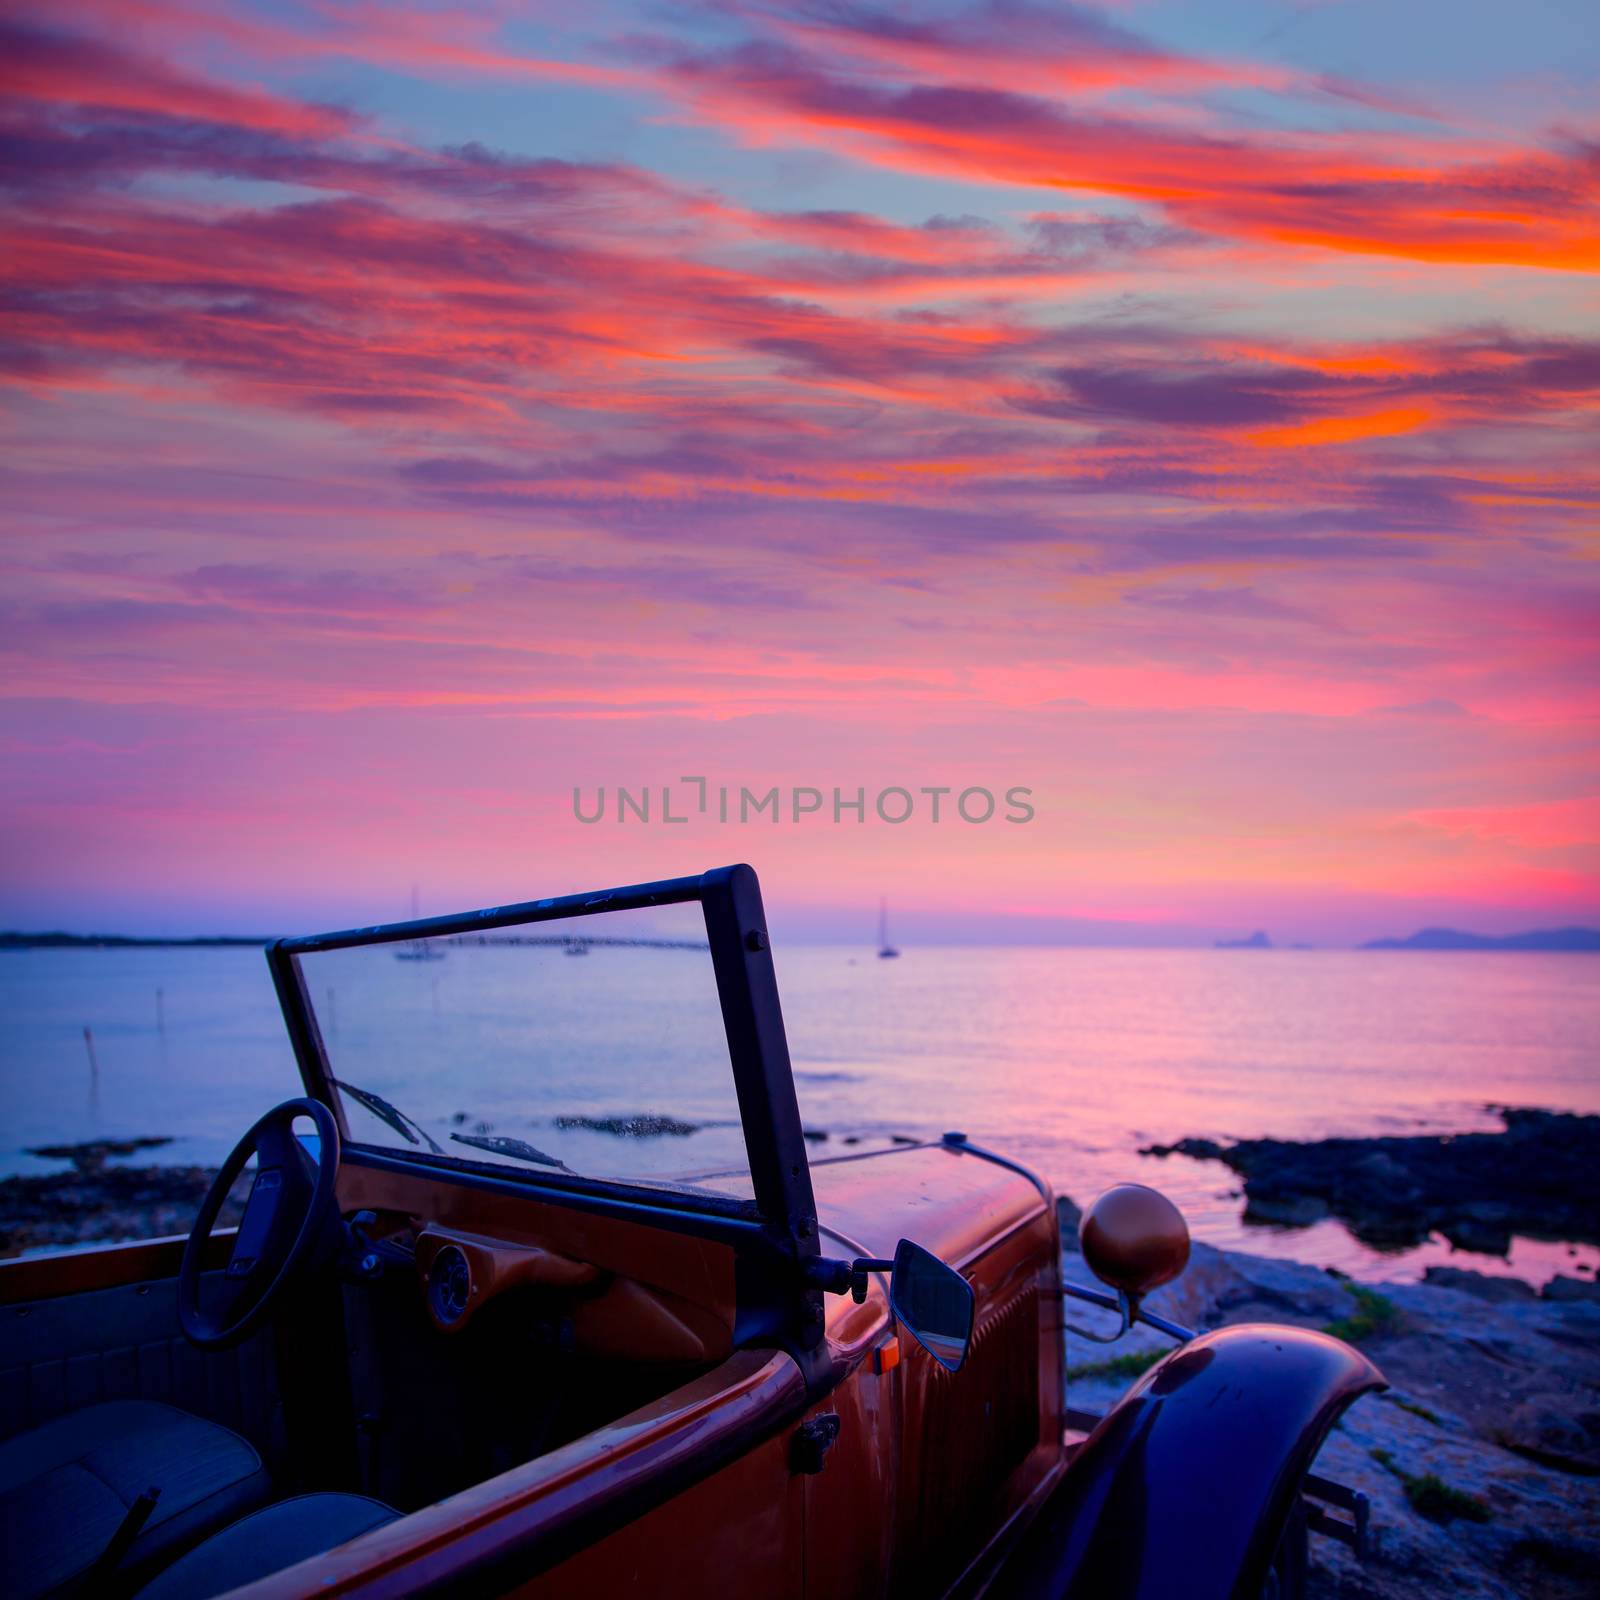 Ibiza sunset view from vintage car at formentera Island in Balearic Islands